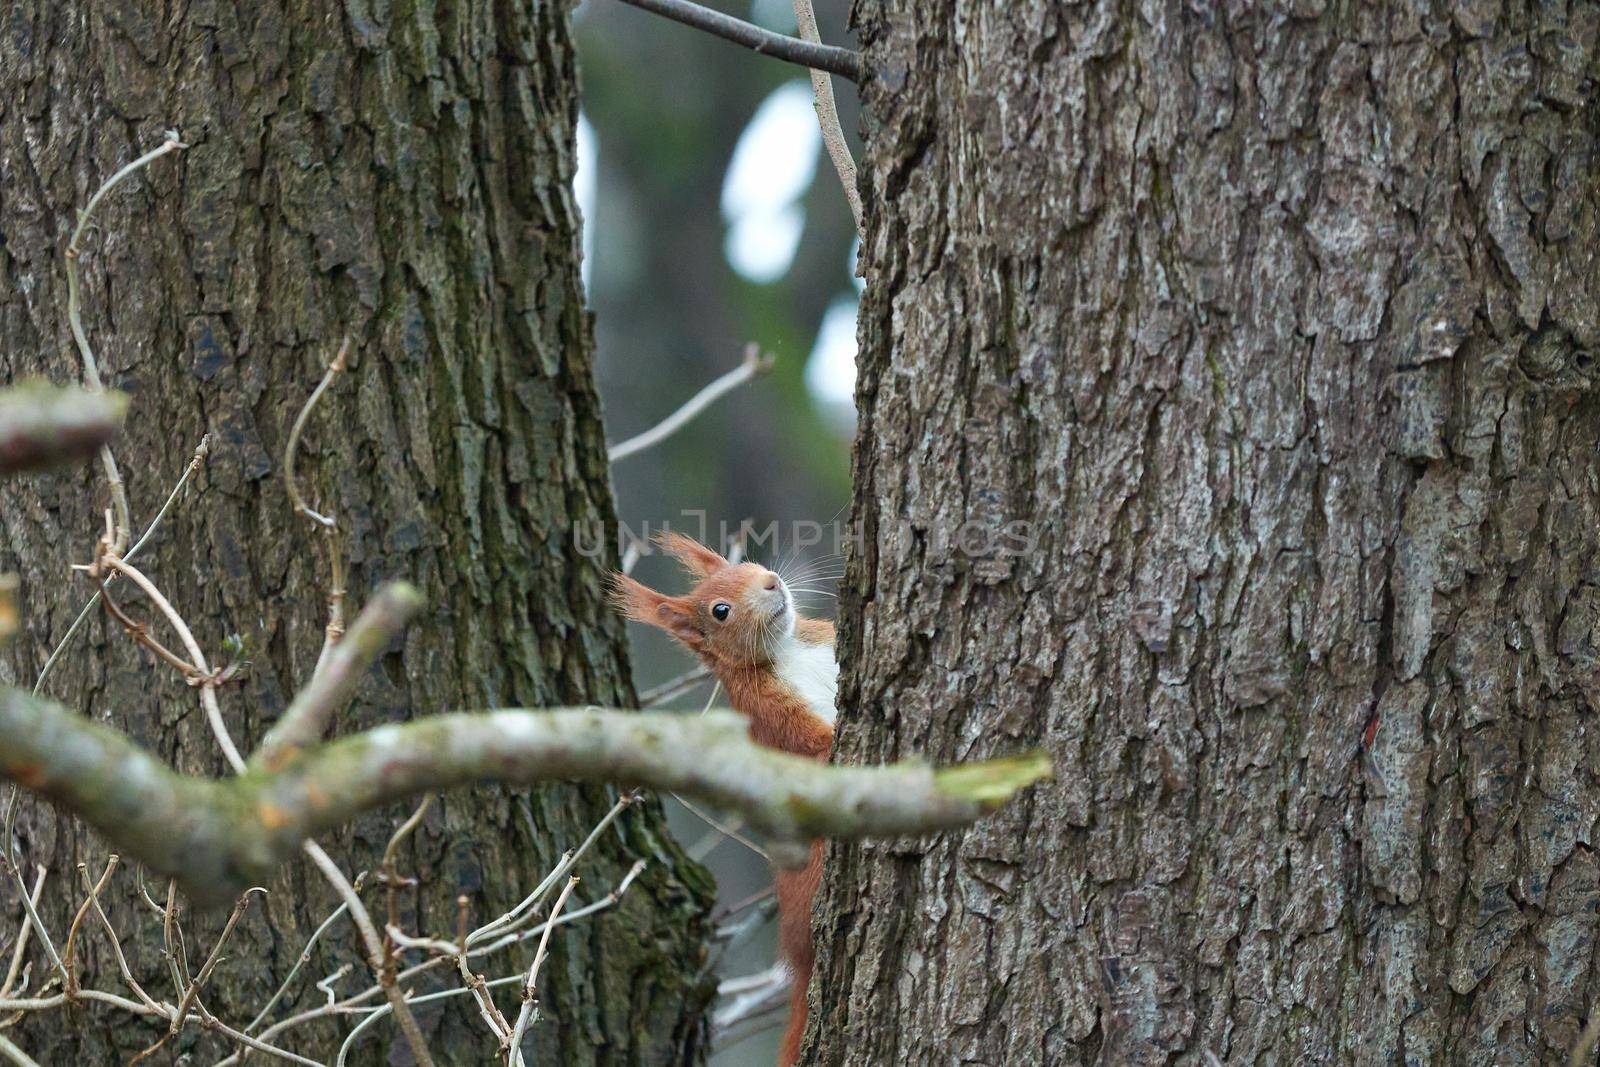 One red squirrel on an oak tree